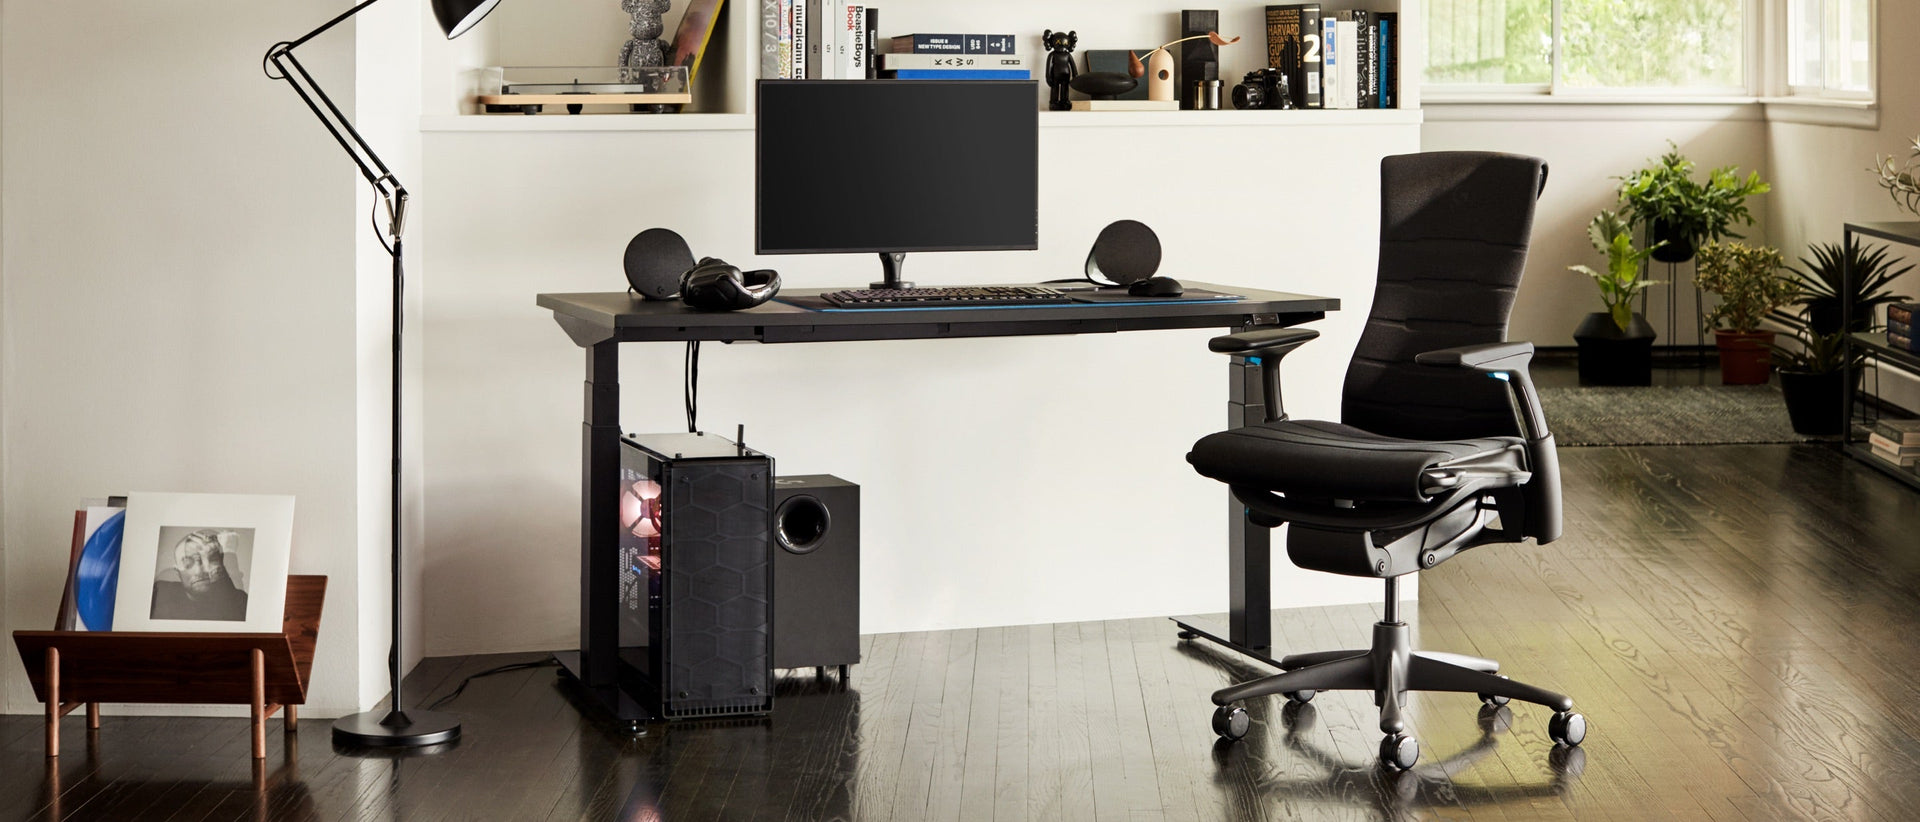 A residential setting features the full set-up, including the Embody Gaming Chair, Ollin Monitor Arm and Motia Gaming Desk, in the daytime.